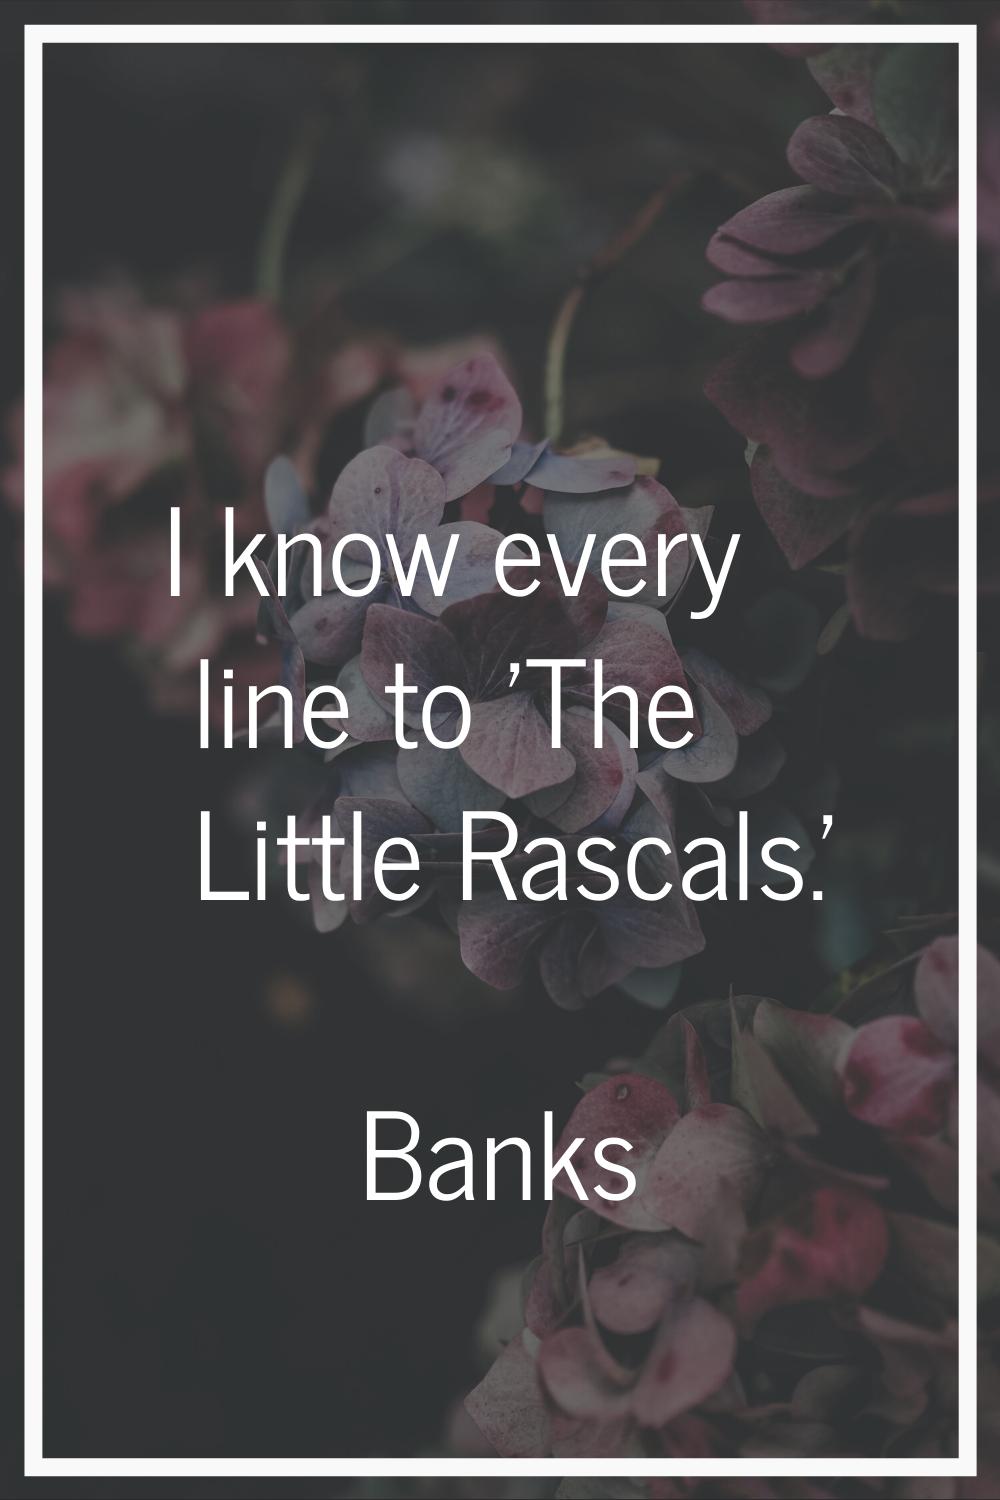 I know every line to 'The Little Rascals.'